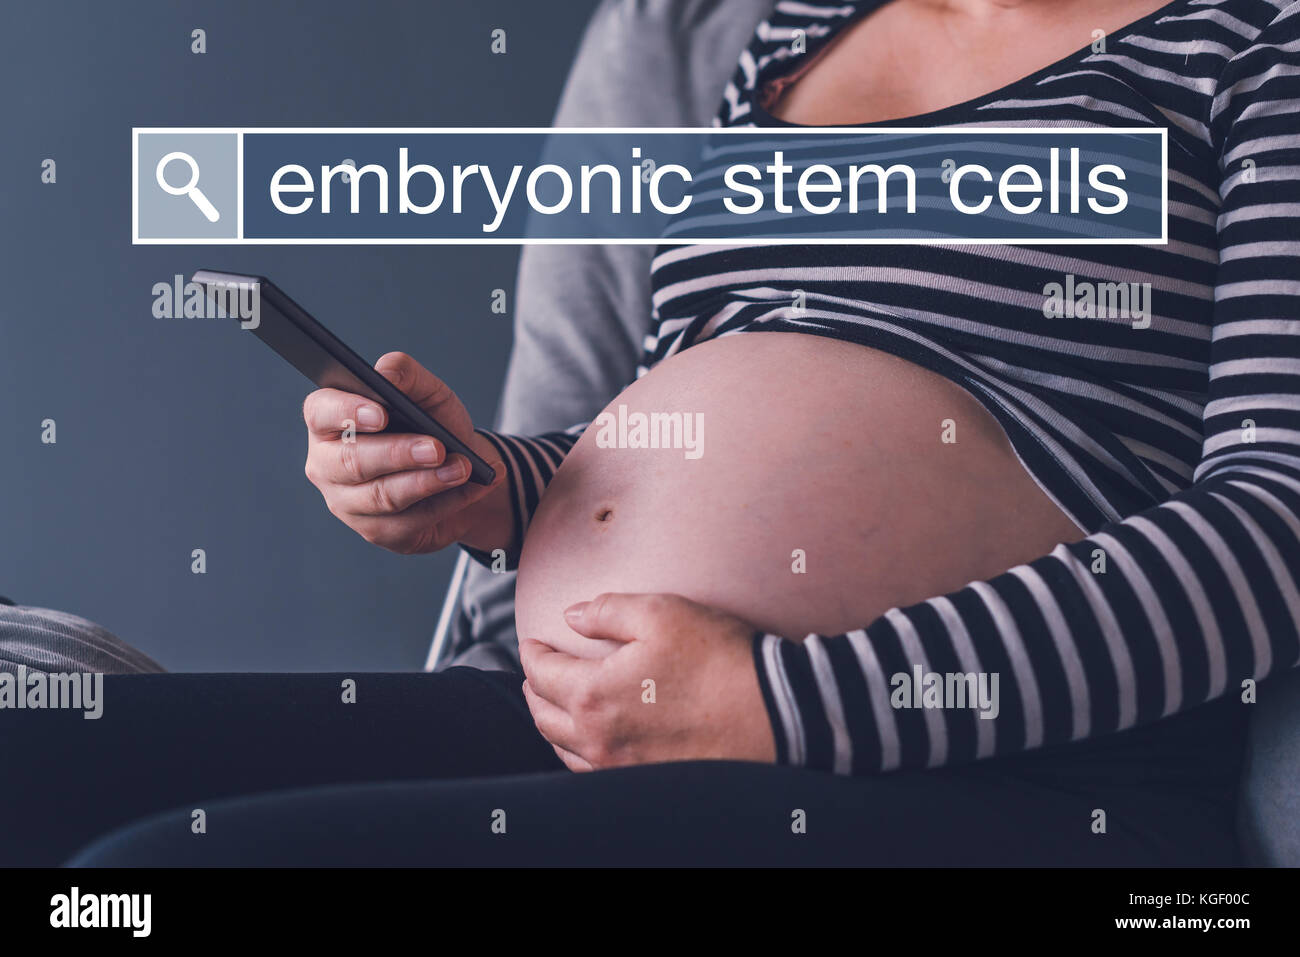 Pregnant woman searching web for embryonic stem cells on her smart phone device Stock Photo